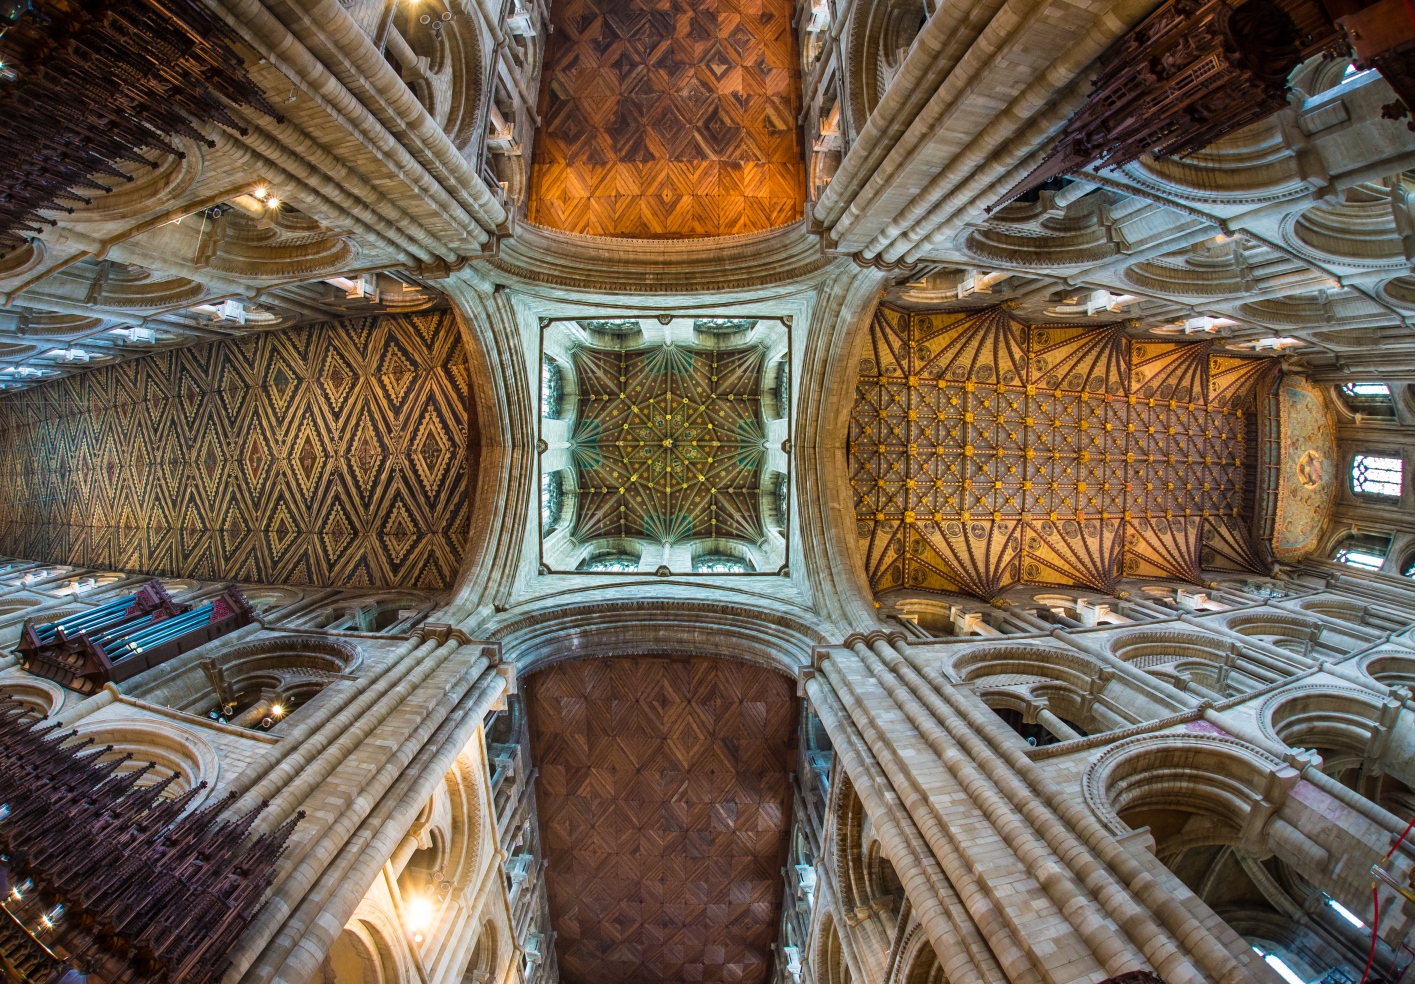 The spectacular ceilings inside Peterborough Cathedral